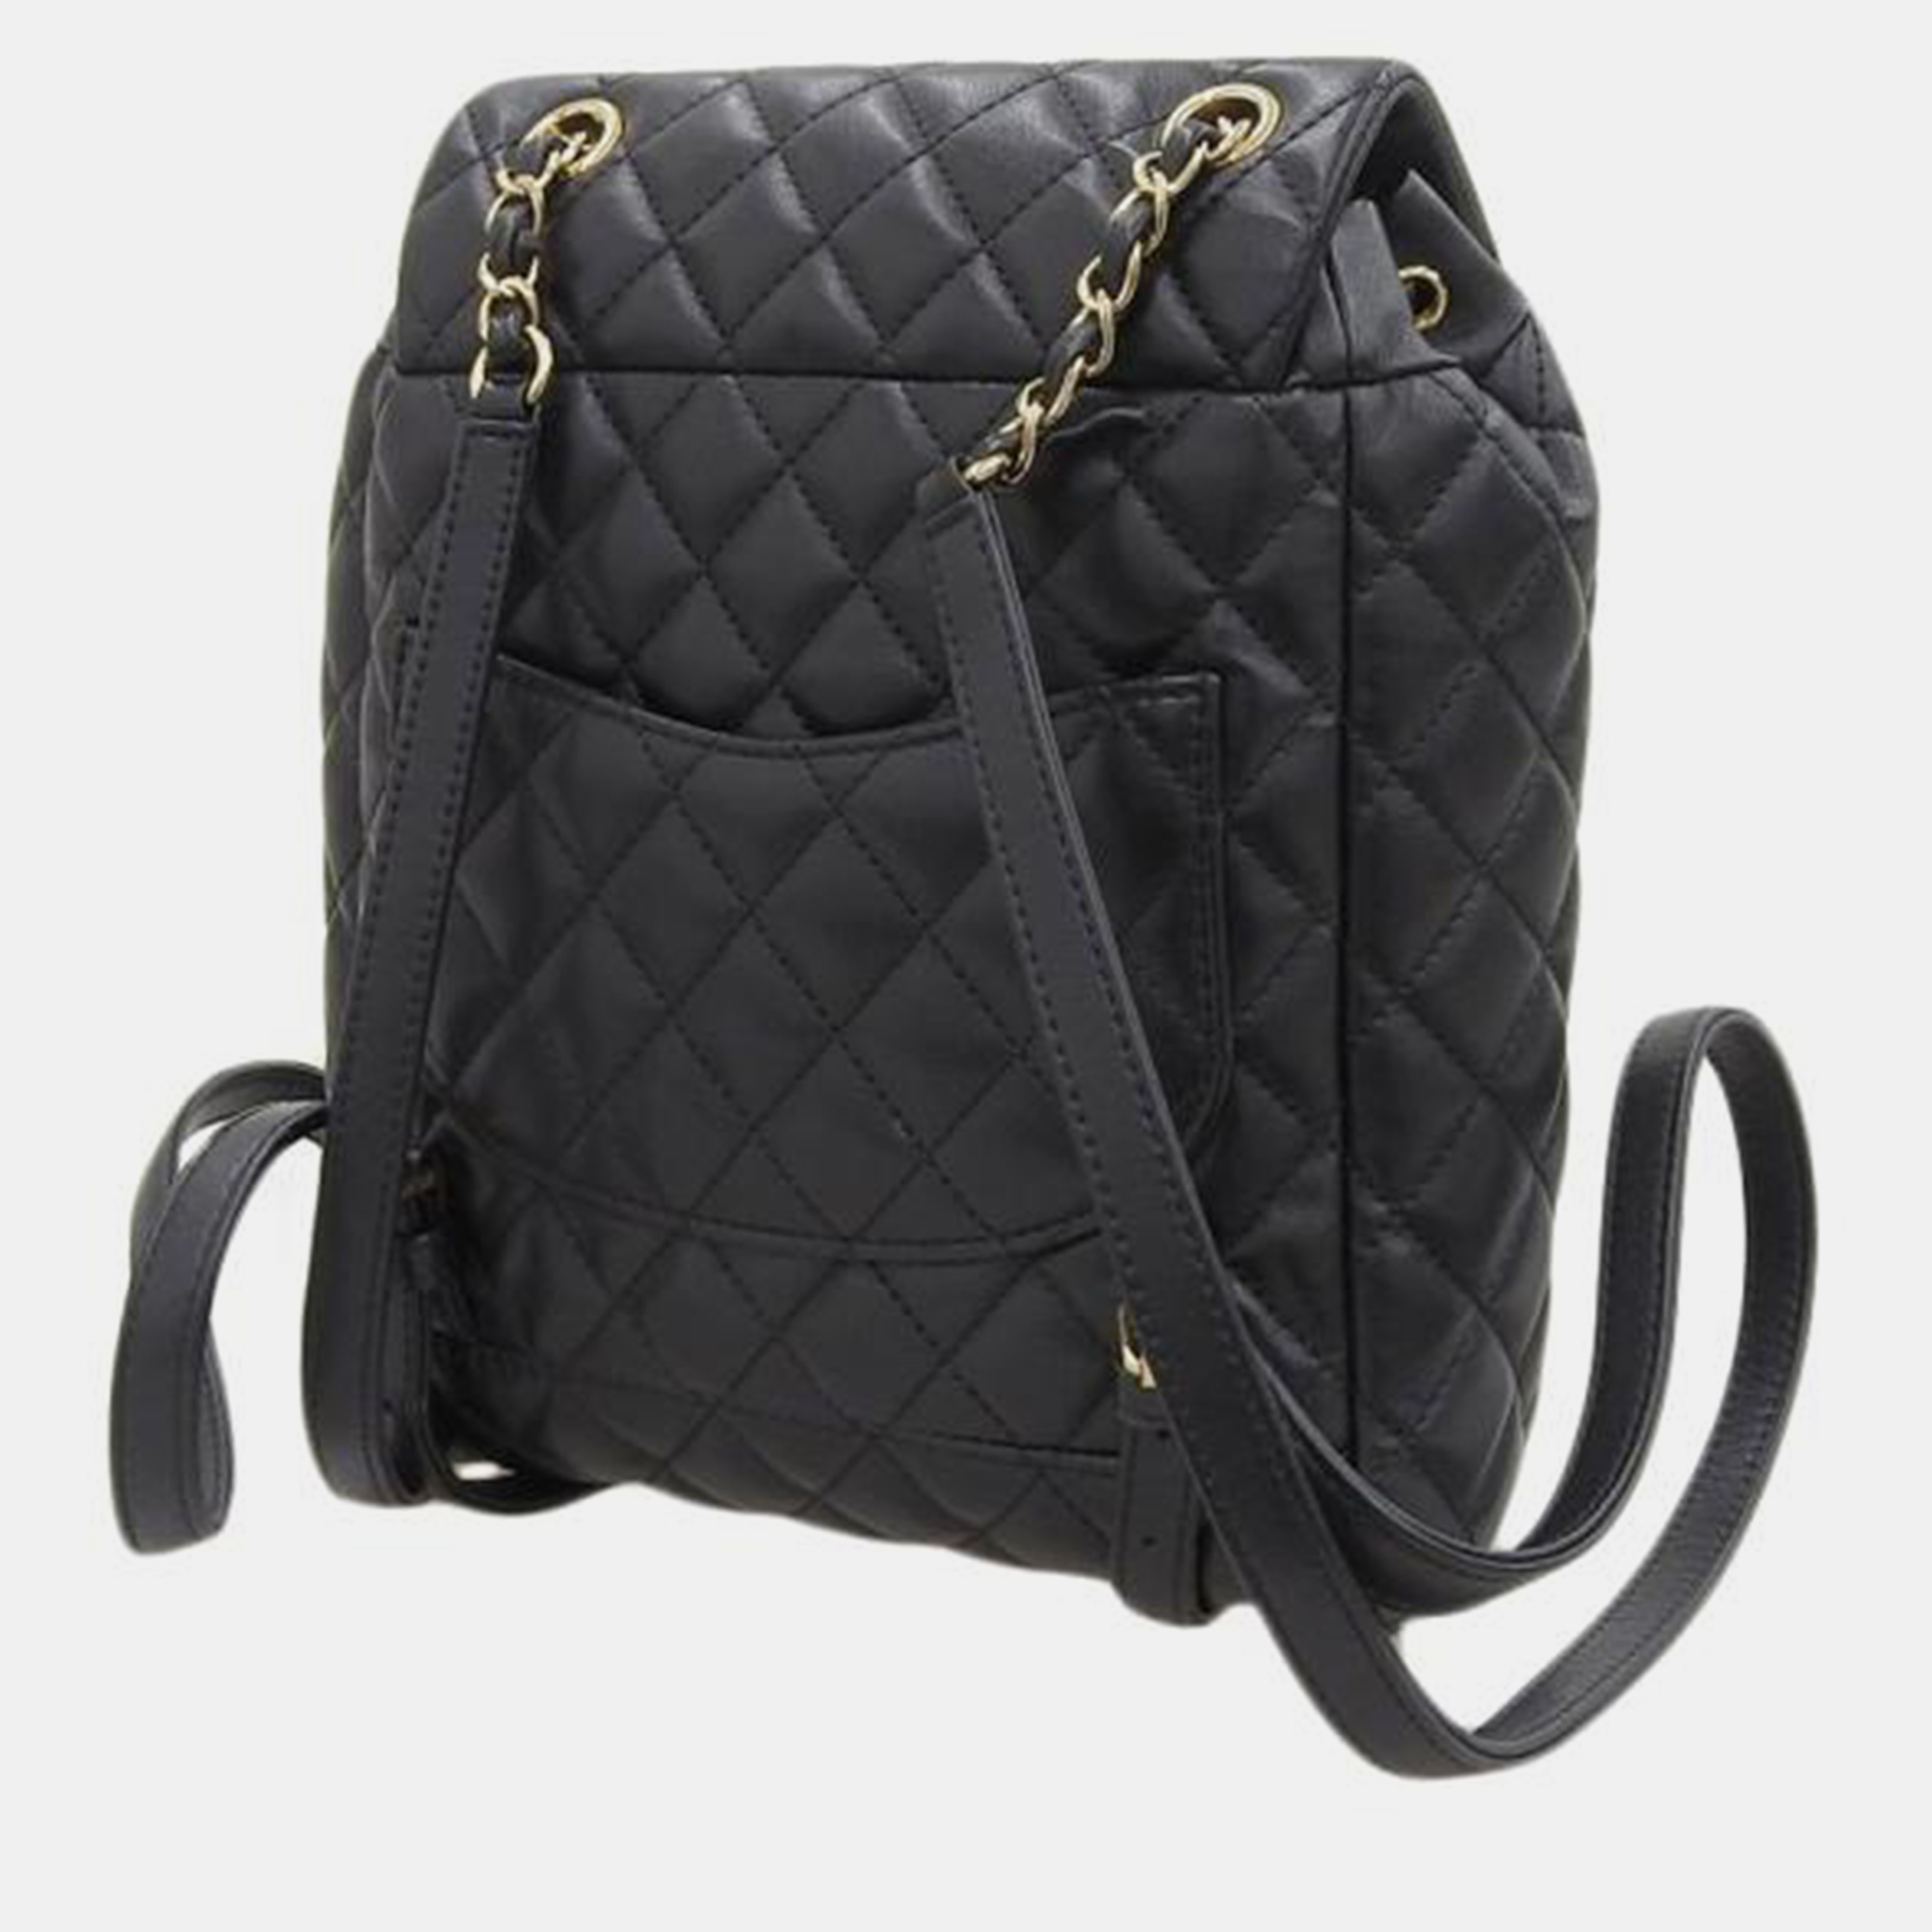 Chanel black cc quilted leather drawstring backpack